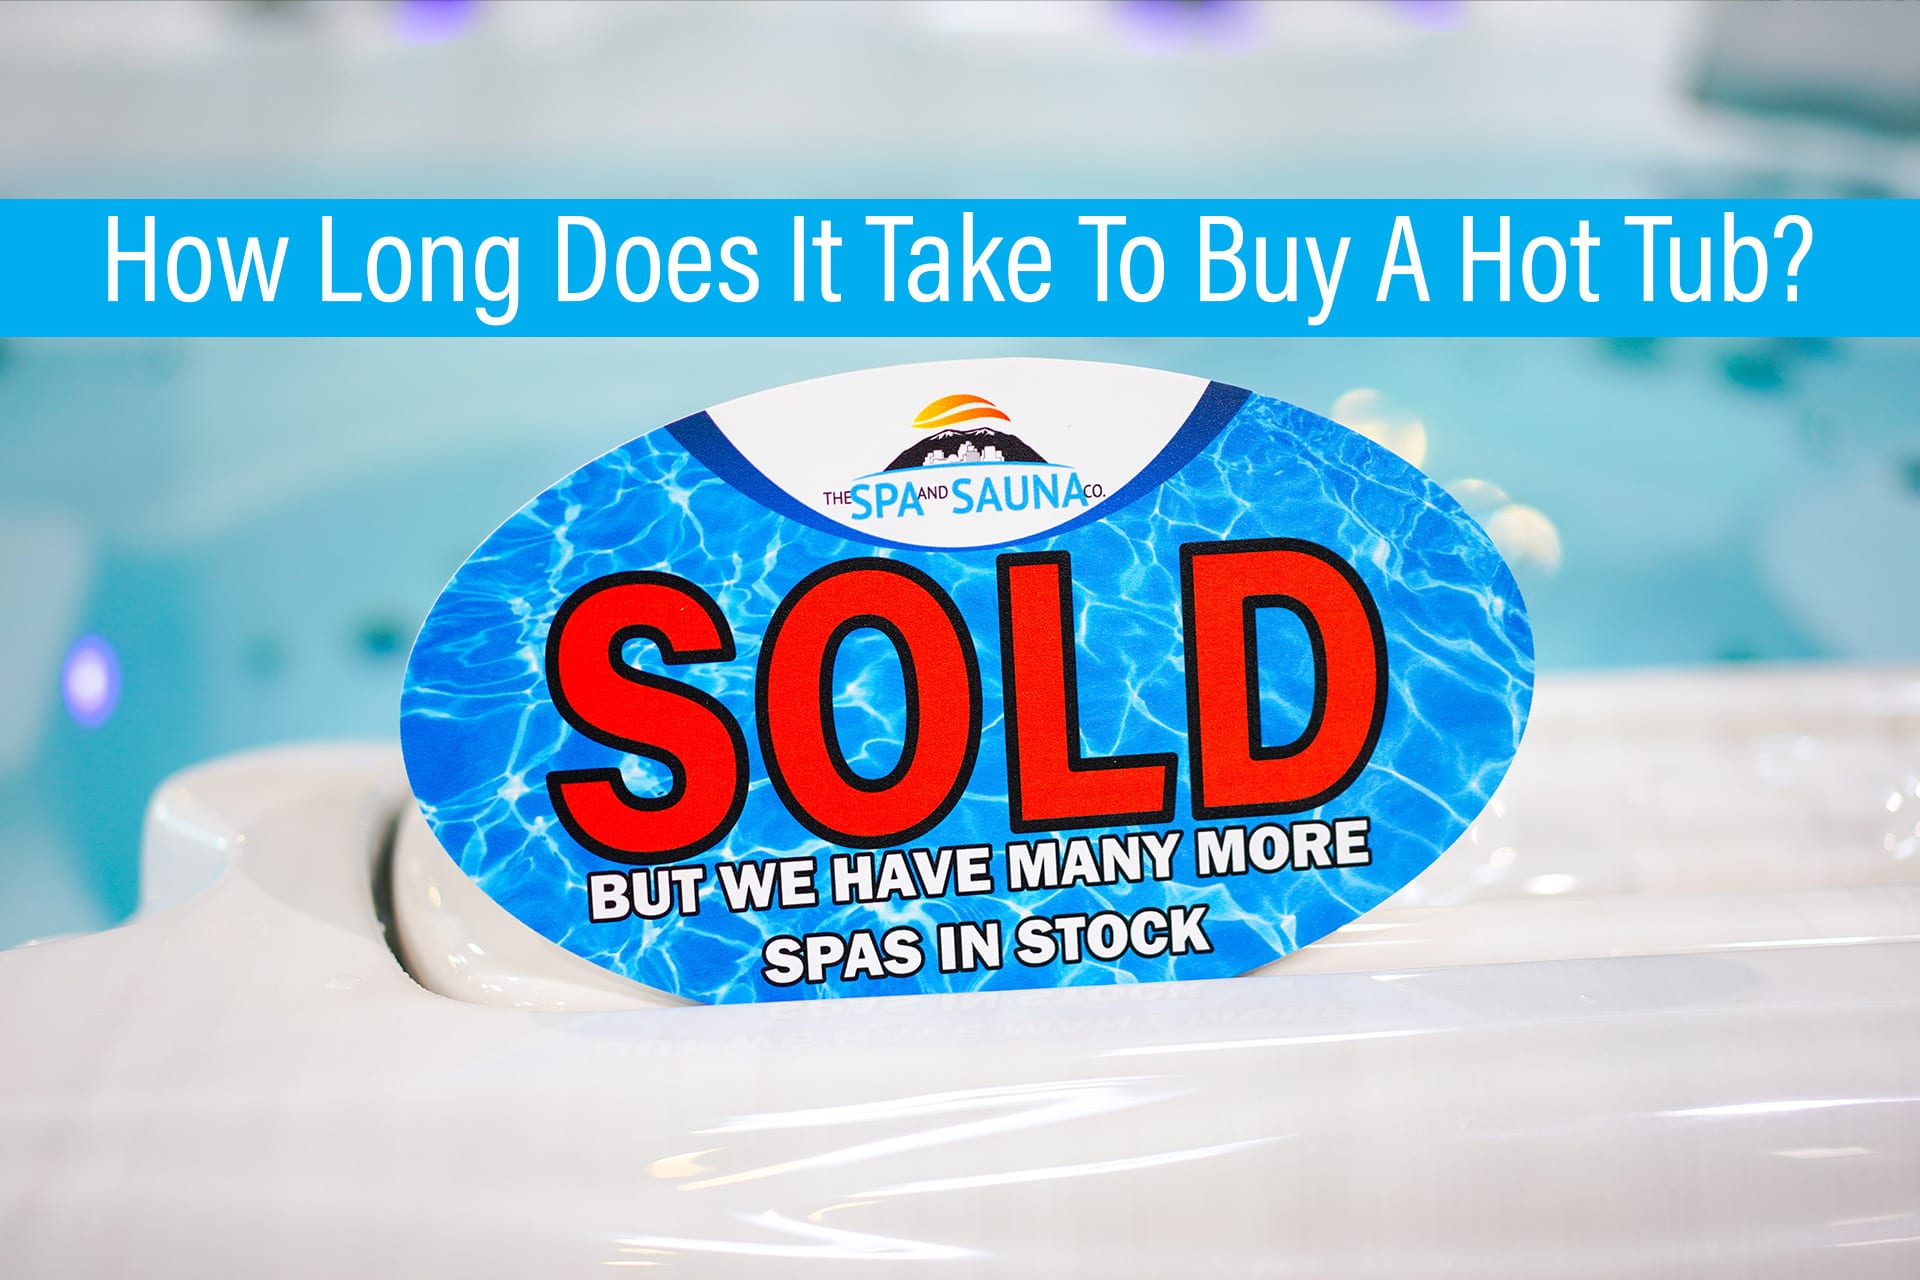 How Long Does It Take to Buy a Hot Tub?